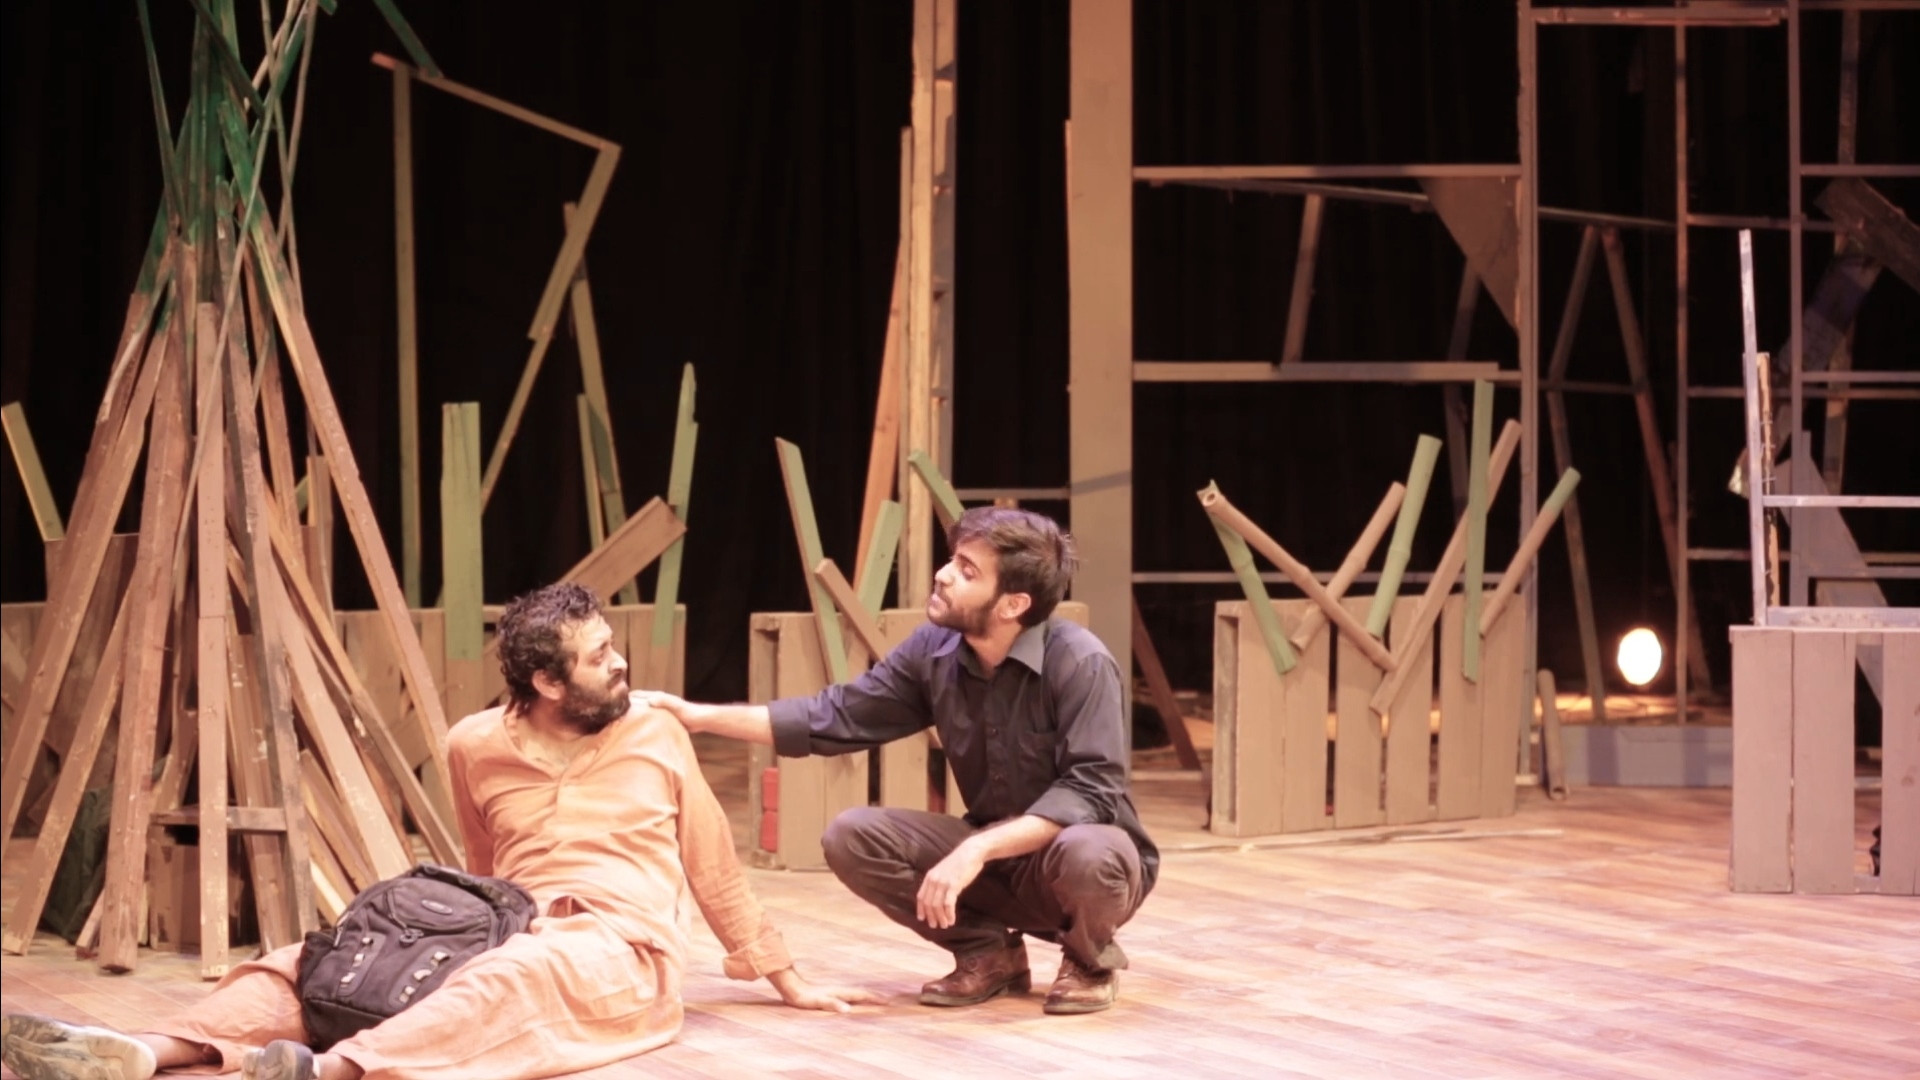 a still from the digitally released play pakkay dost starring farhan alam and zain qureshi